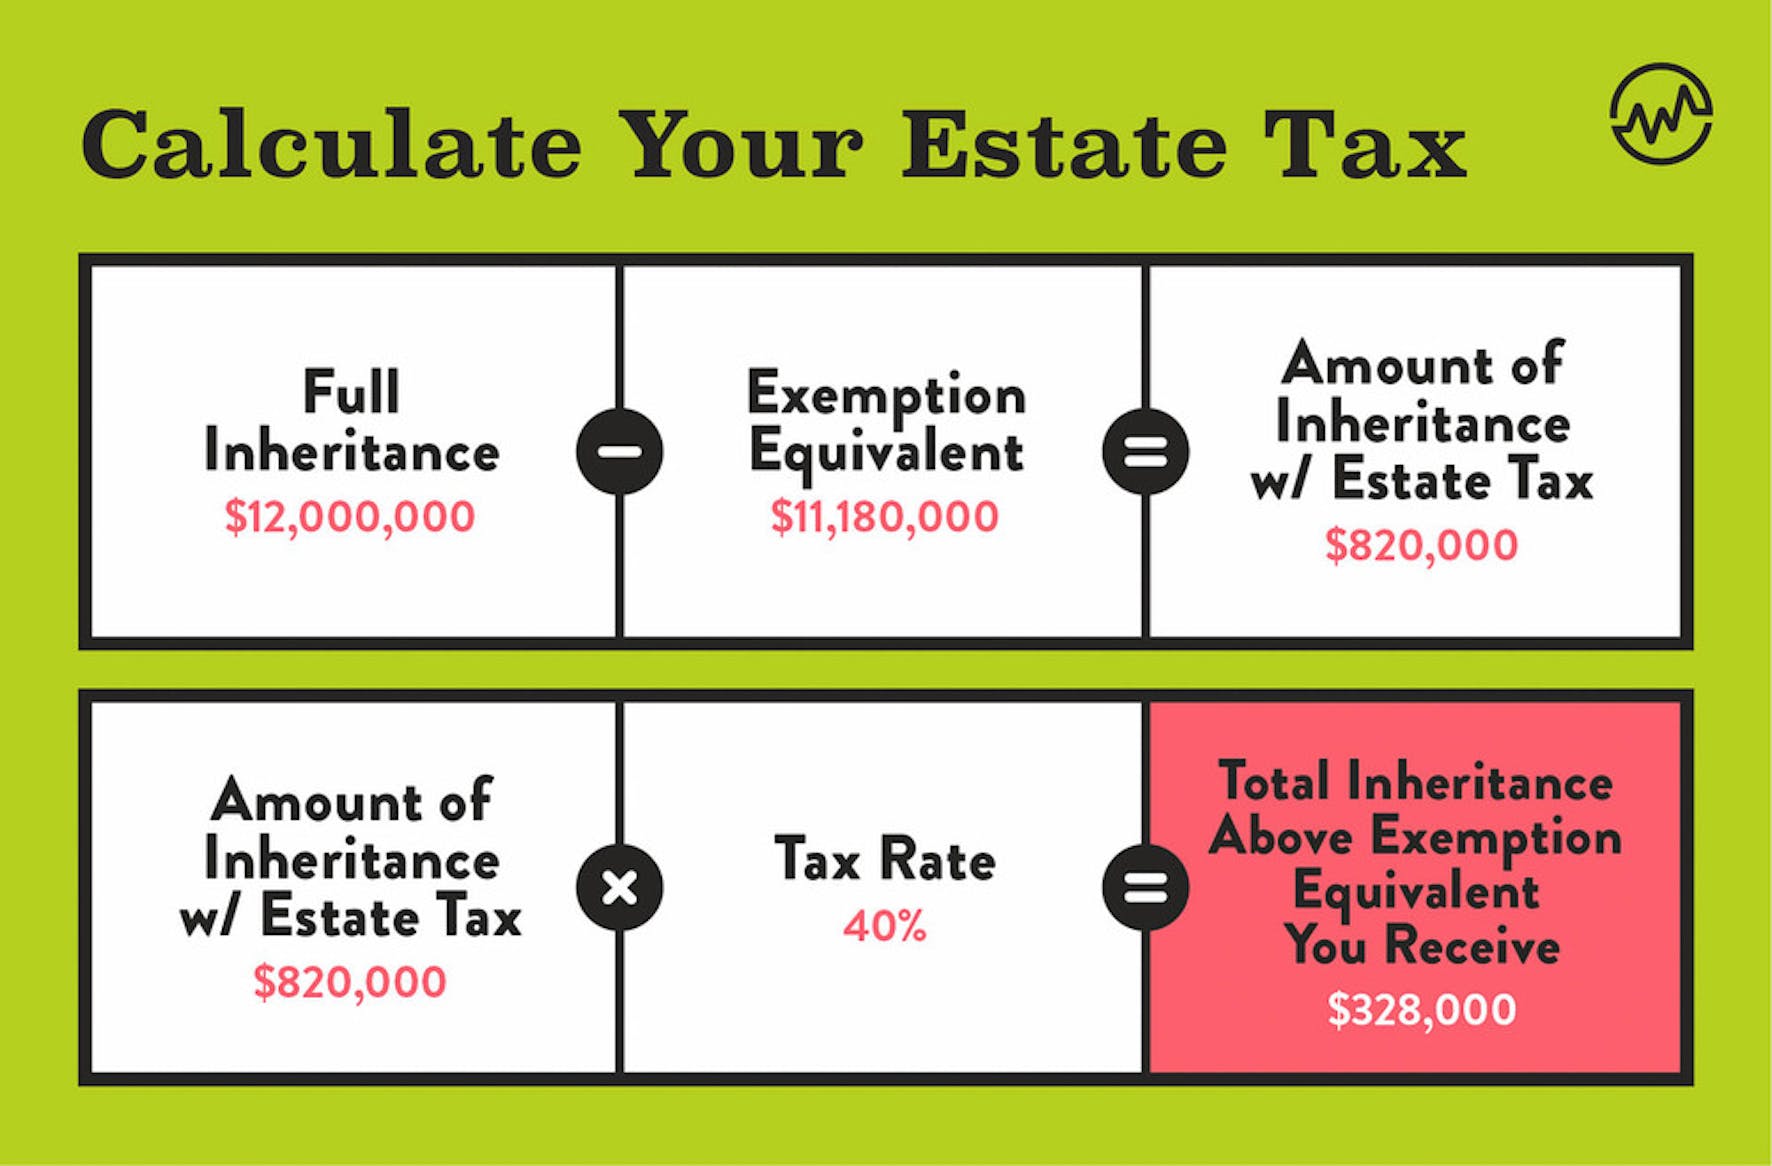 How is inherited real estate taxed when sold